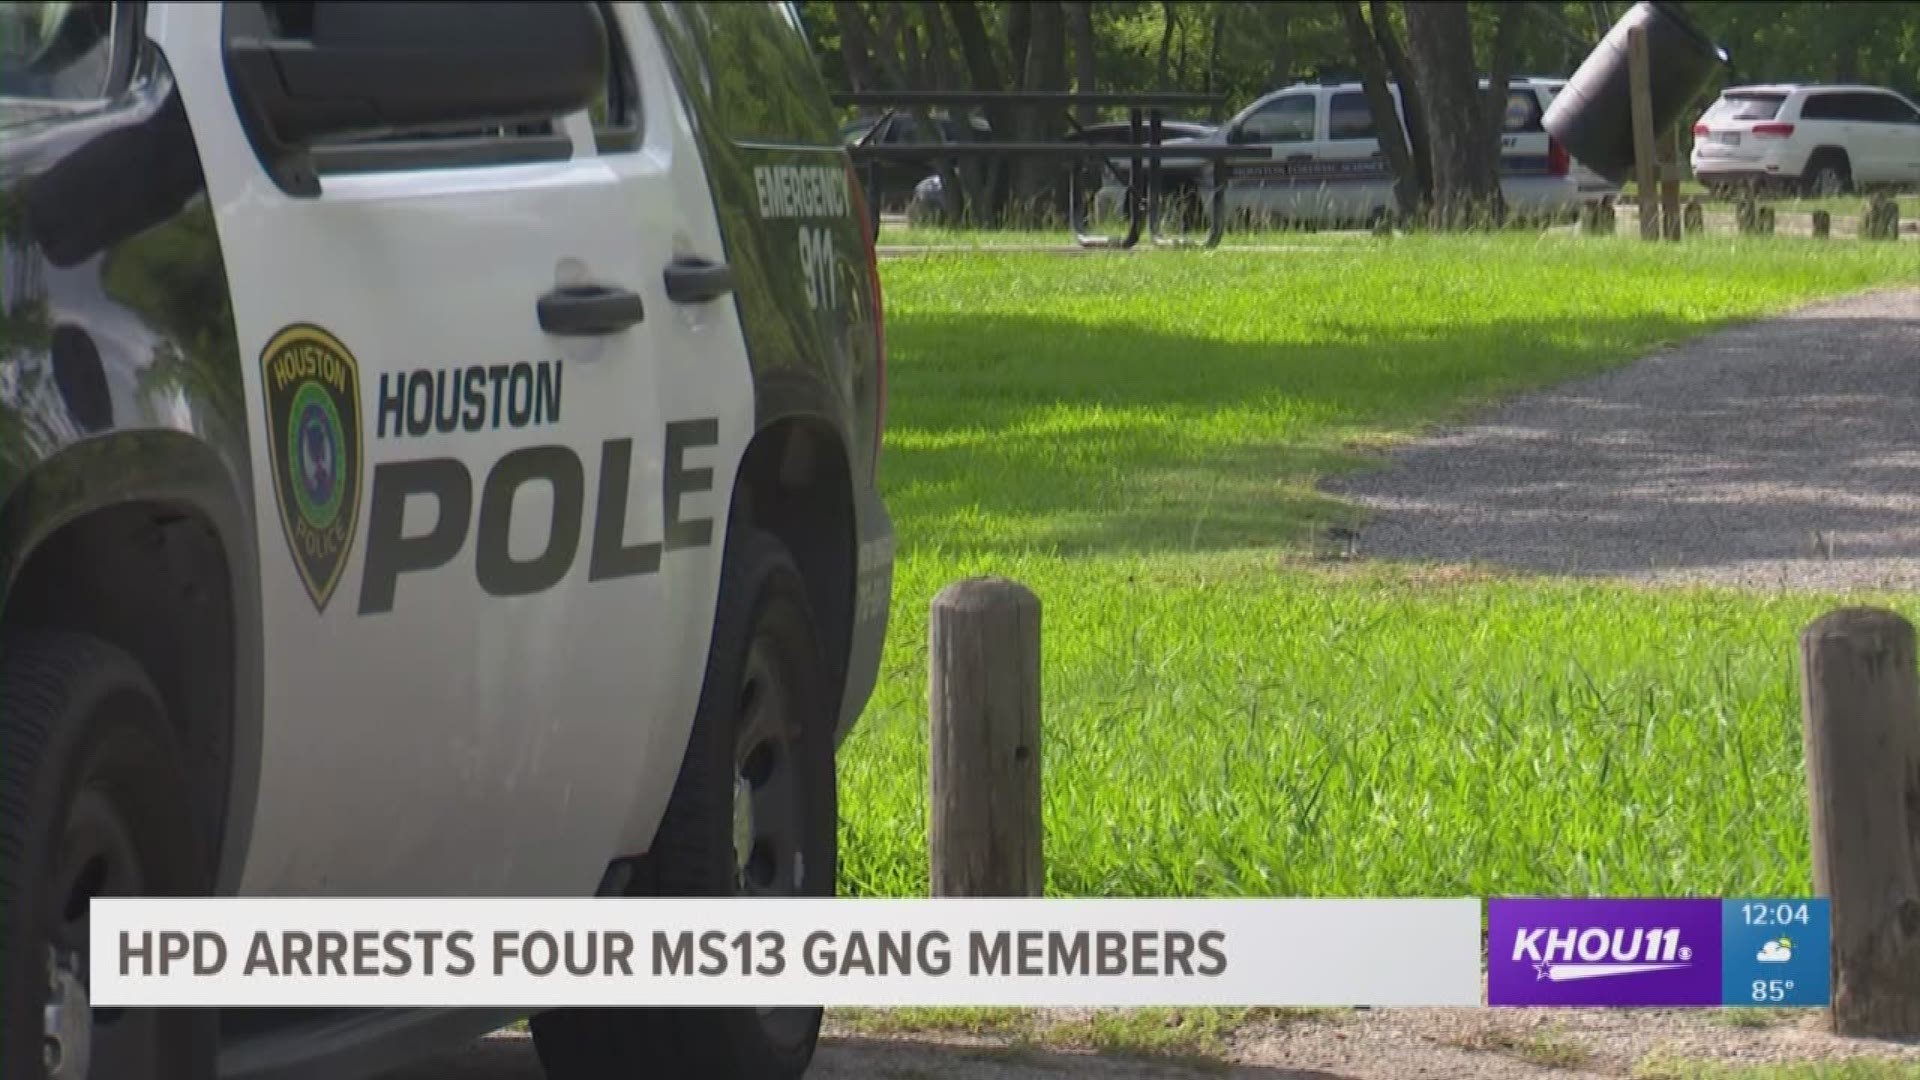 Nine MS-13 gang members are in custody and two more are wanted in connection with six murders in Harris, Galveston and Liberty counties. The victims include a juvenile girl, a fellow gang member killed with a machete and a man who was in the wrong place at the wrong time.